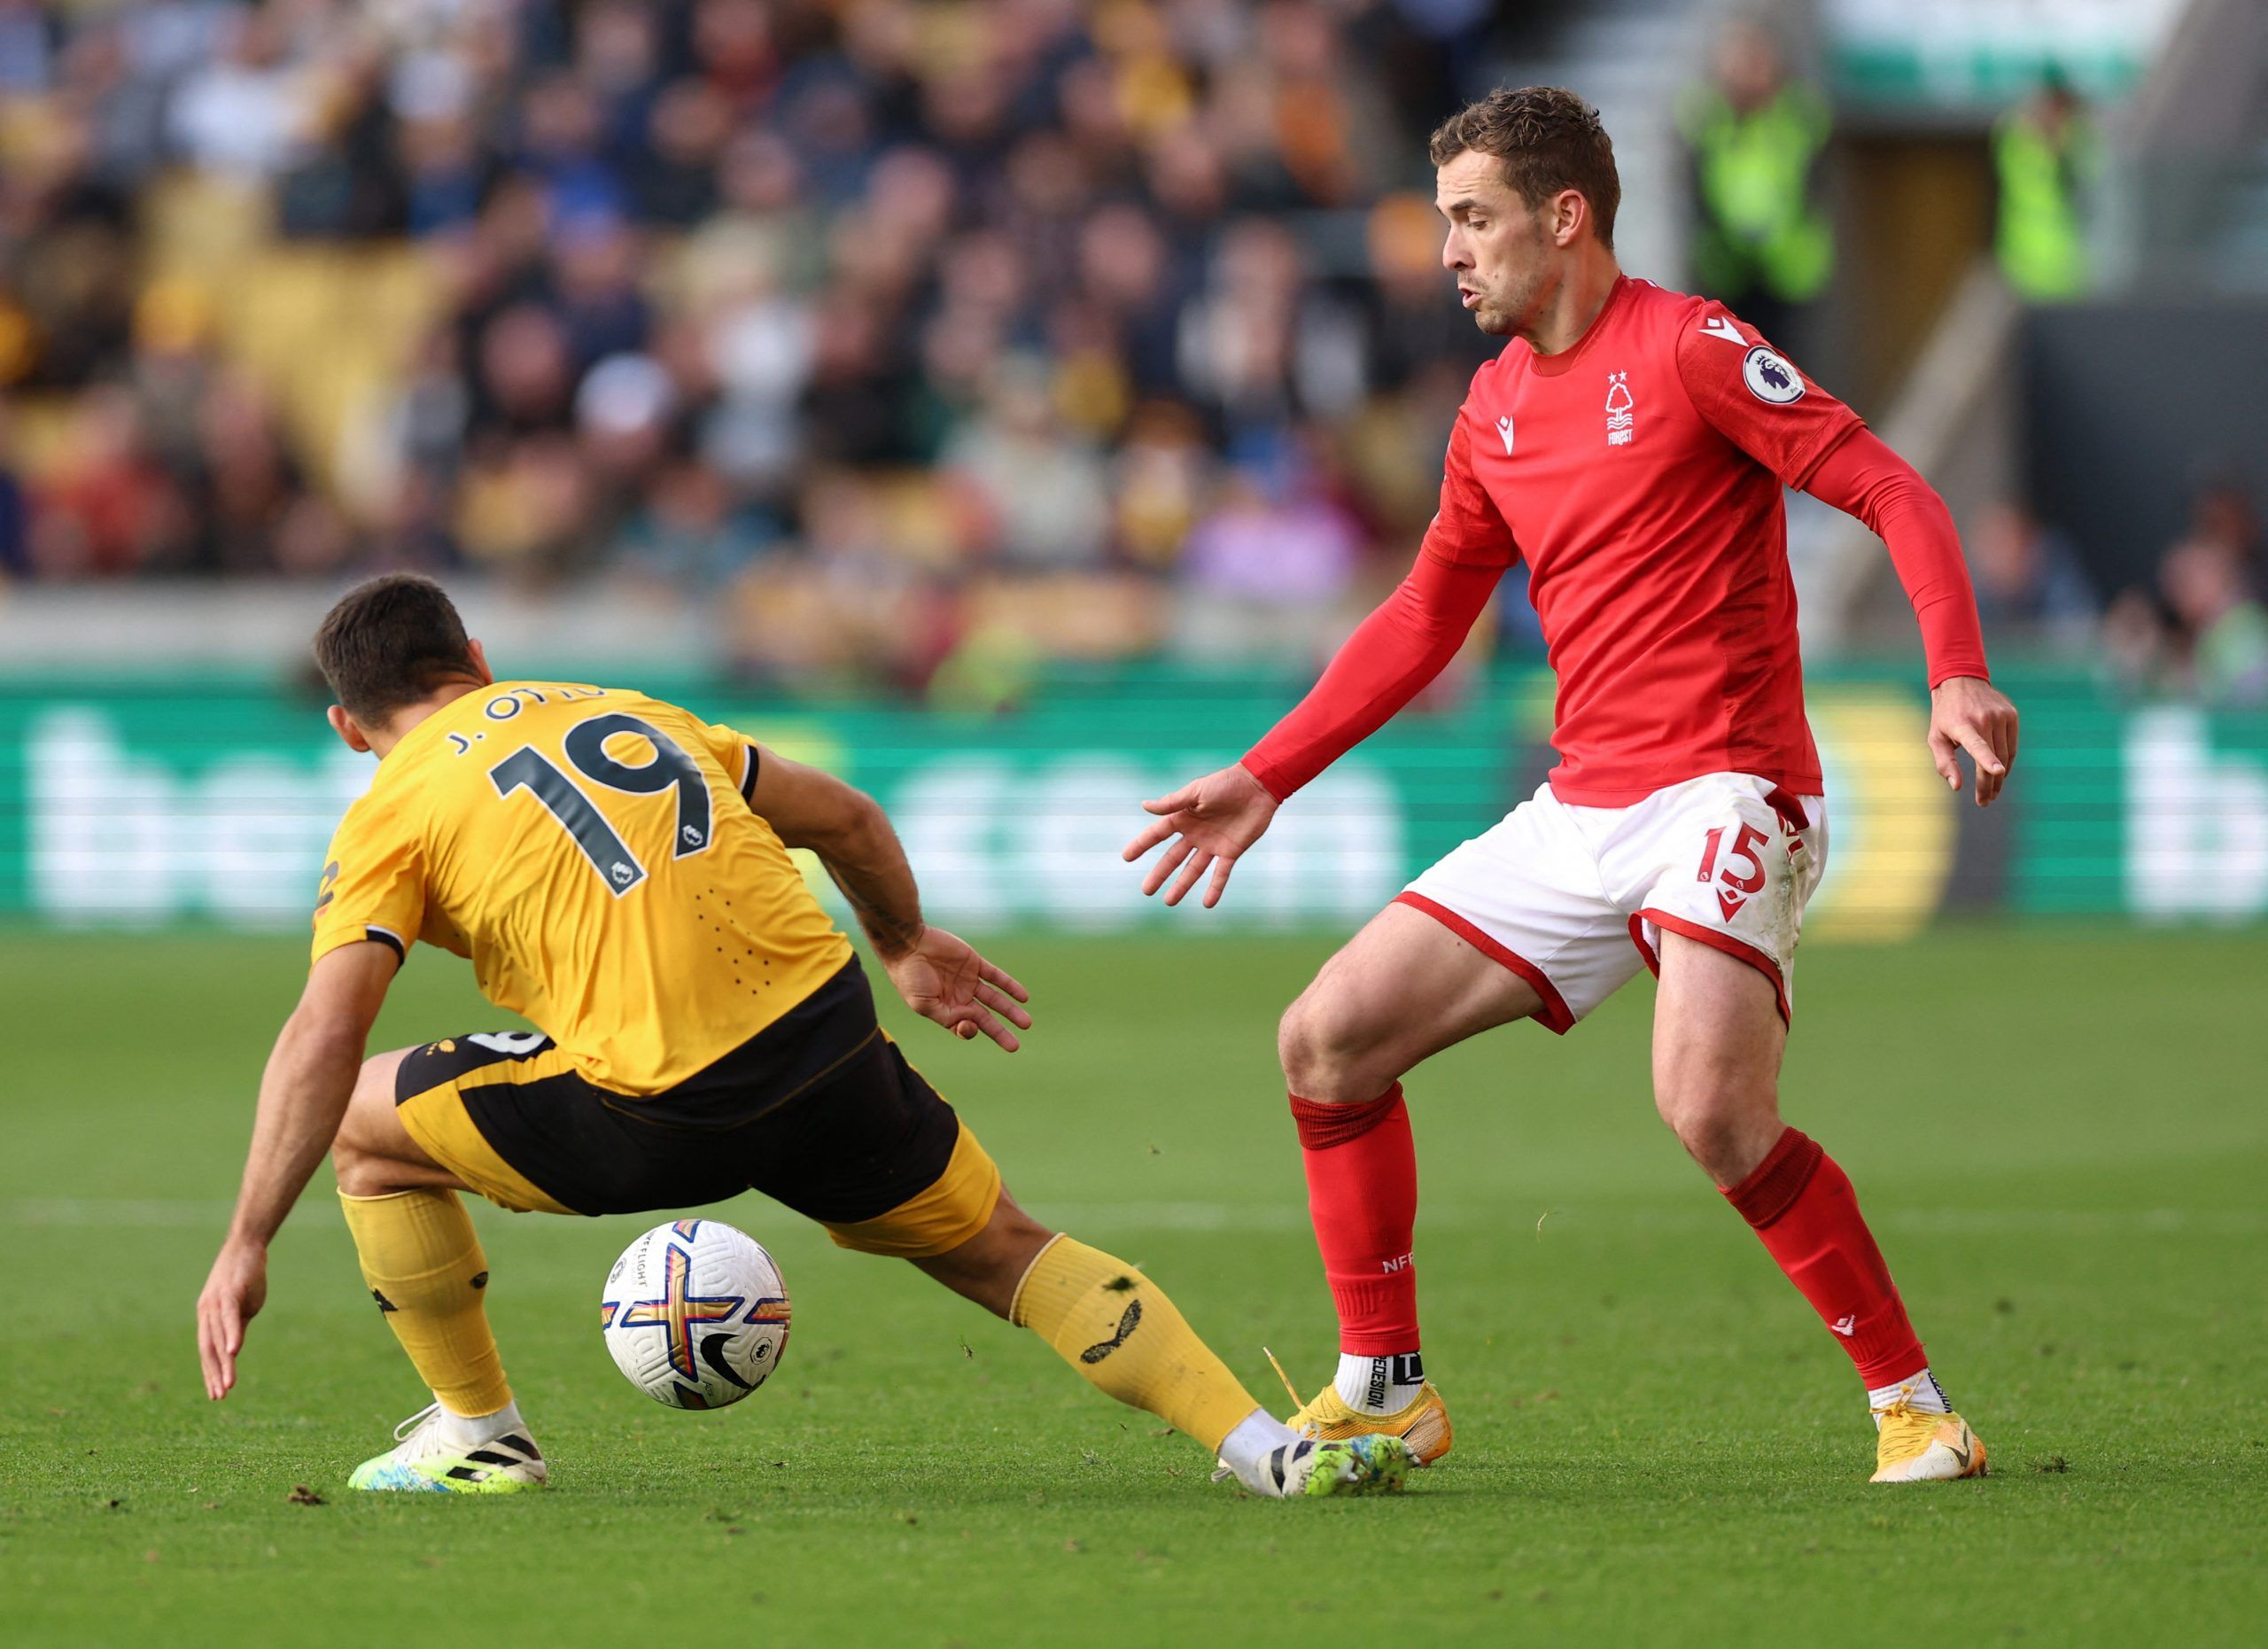 Soccer Football - Premier League - Wolverhampton Wanderers v Nottingham Forest - Molineux Stadium, Wolverhampton, Britain - October 15, 2022  Wolverhampton Wanderers' Jonny in action with Nottingham Forest's Harry Toffolo Action Images via Reuters/Andrew Boyers EDITORIAL USE ONLY. No use with unauthorized audio, video, data, fixture lists, club/league logos or 'live' services. Online in-match use limited to 75 images, no video emulation. No use in betting, games or single club /league/player pub